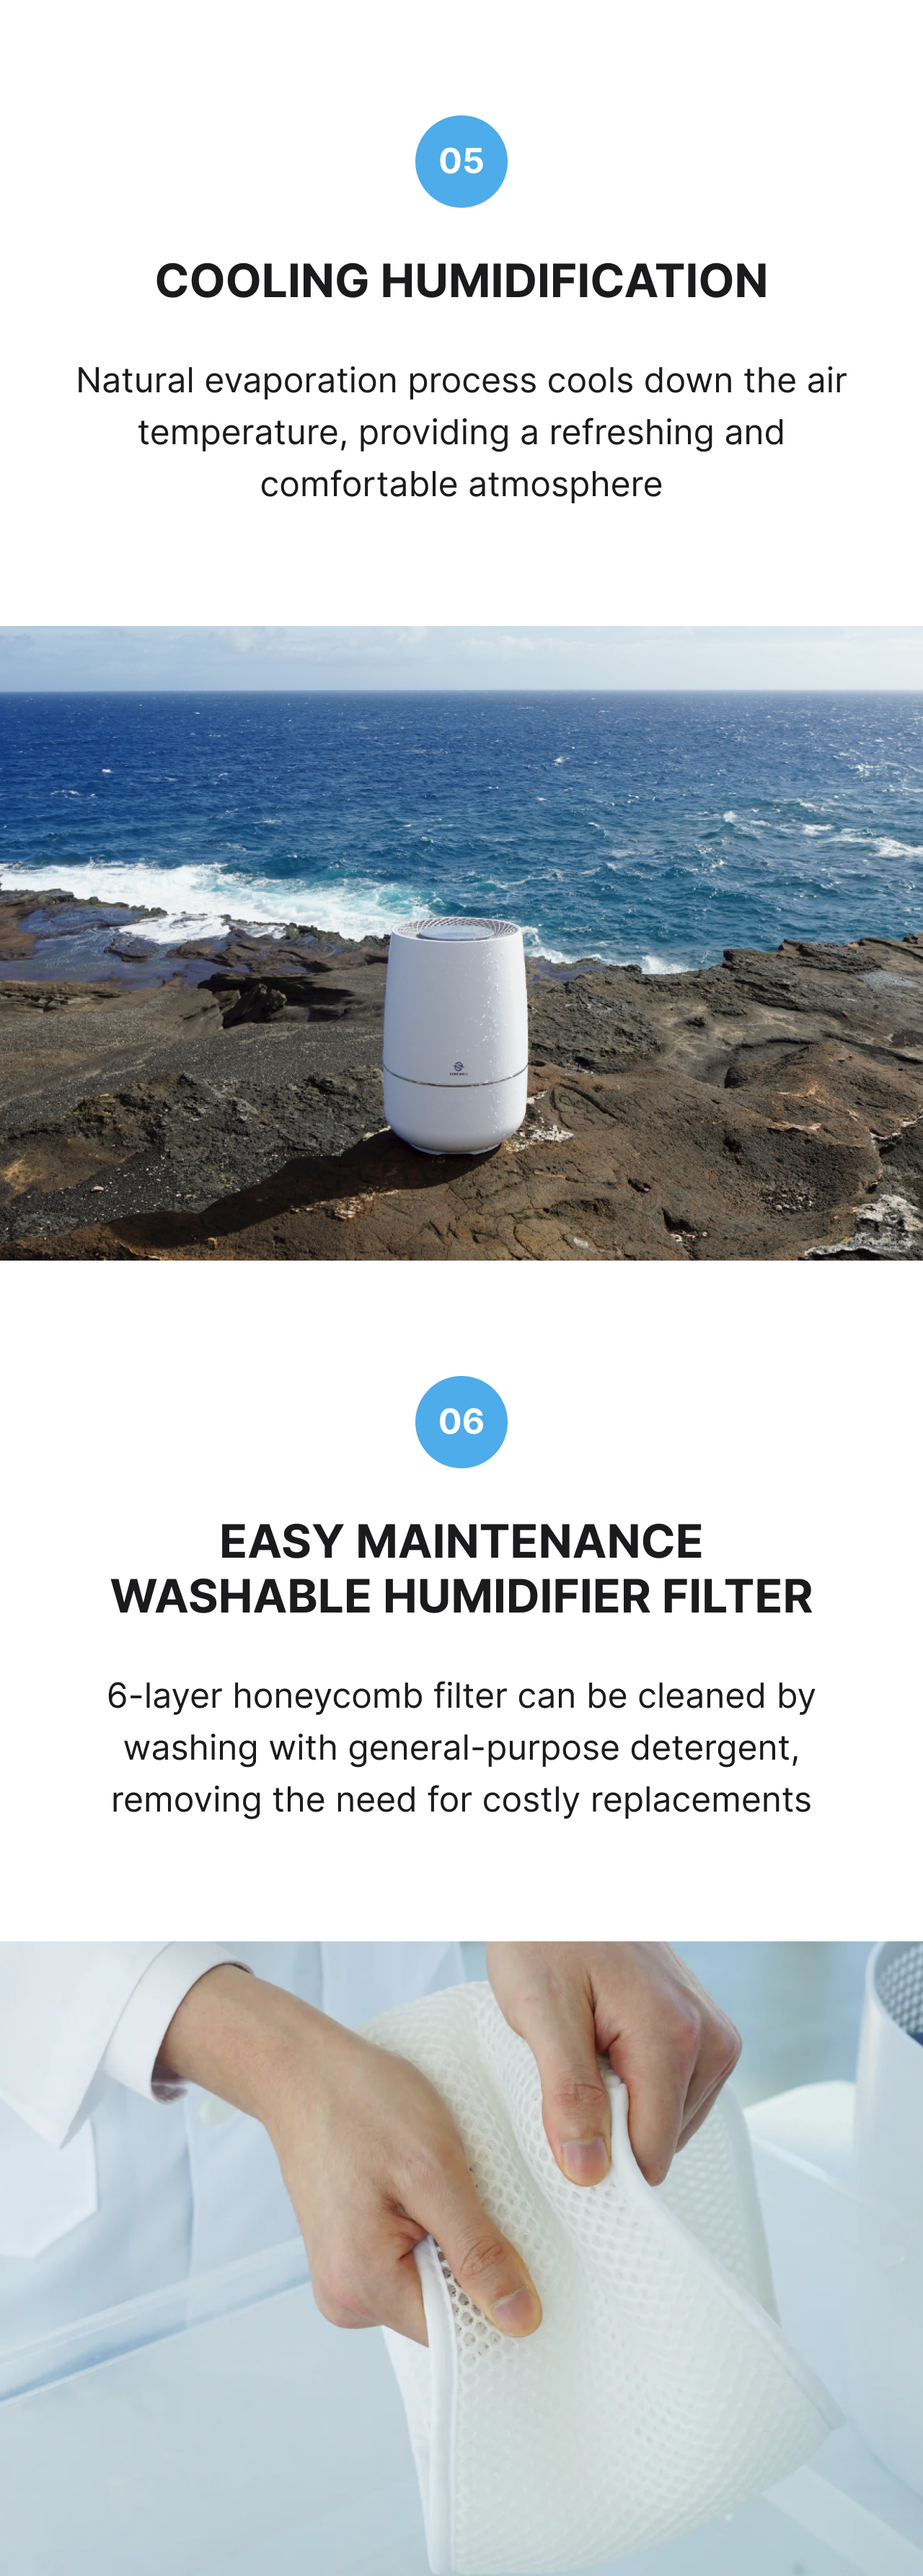 Air Purifier and Humidifier product description image describing how the humidification cools the air and the humidifier filter is easy to maintain because you can easily wash the 6-layer honeycomb fiber filter with general-purpose detergent